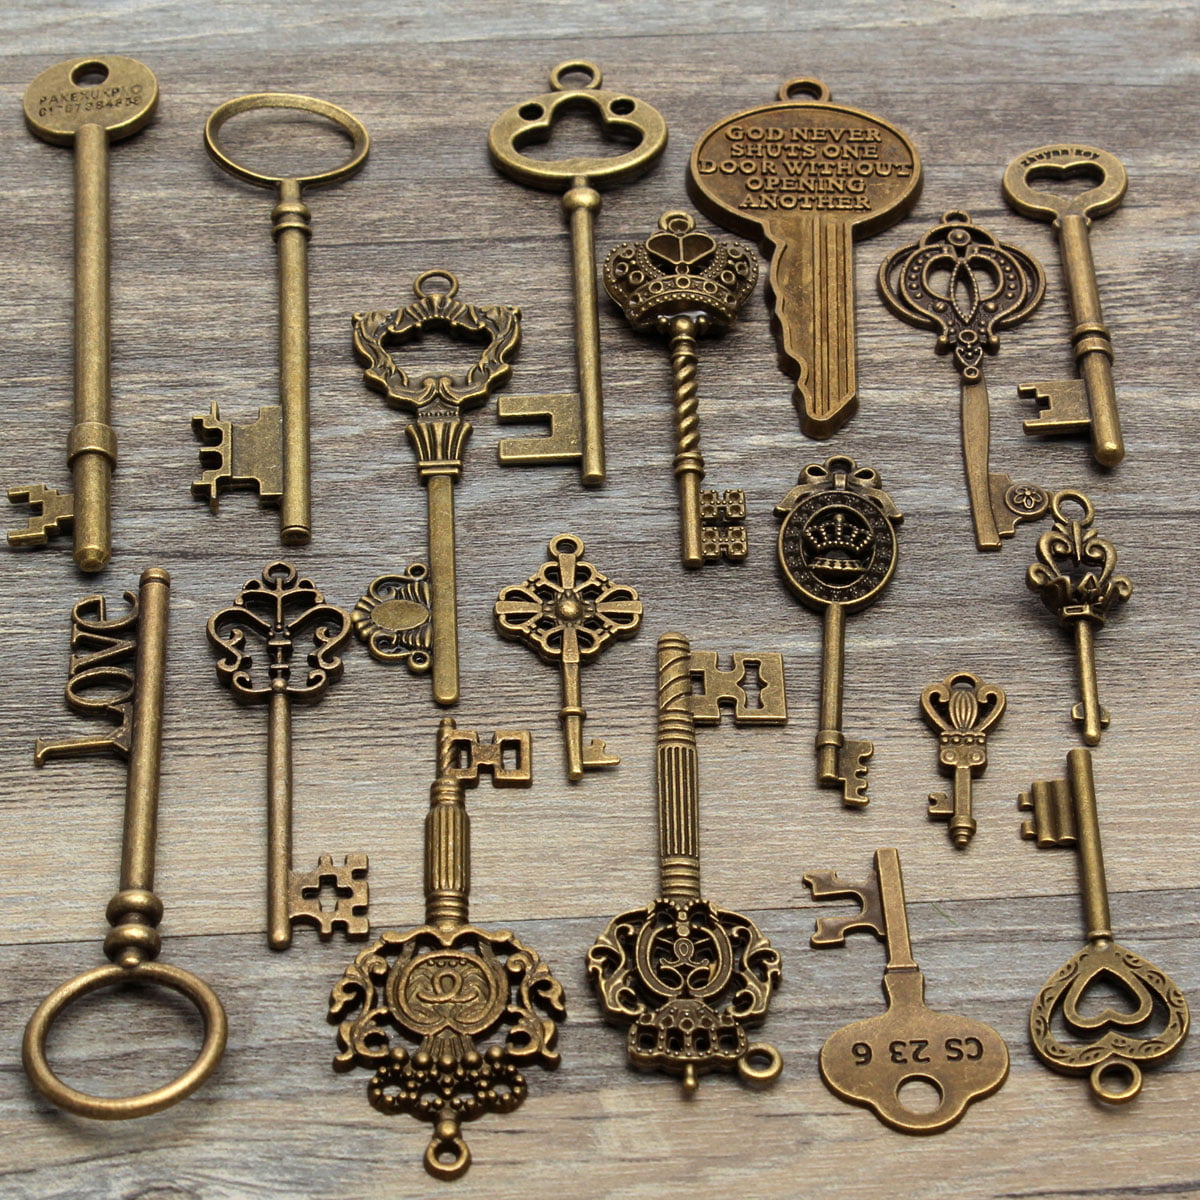 steampunk keys 25 new old look antique style colors 3 metal silver gold bronze 